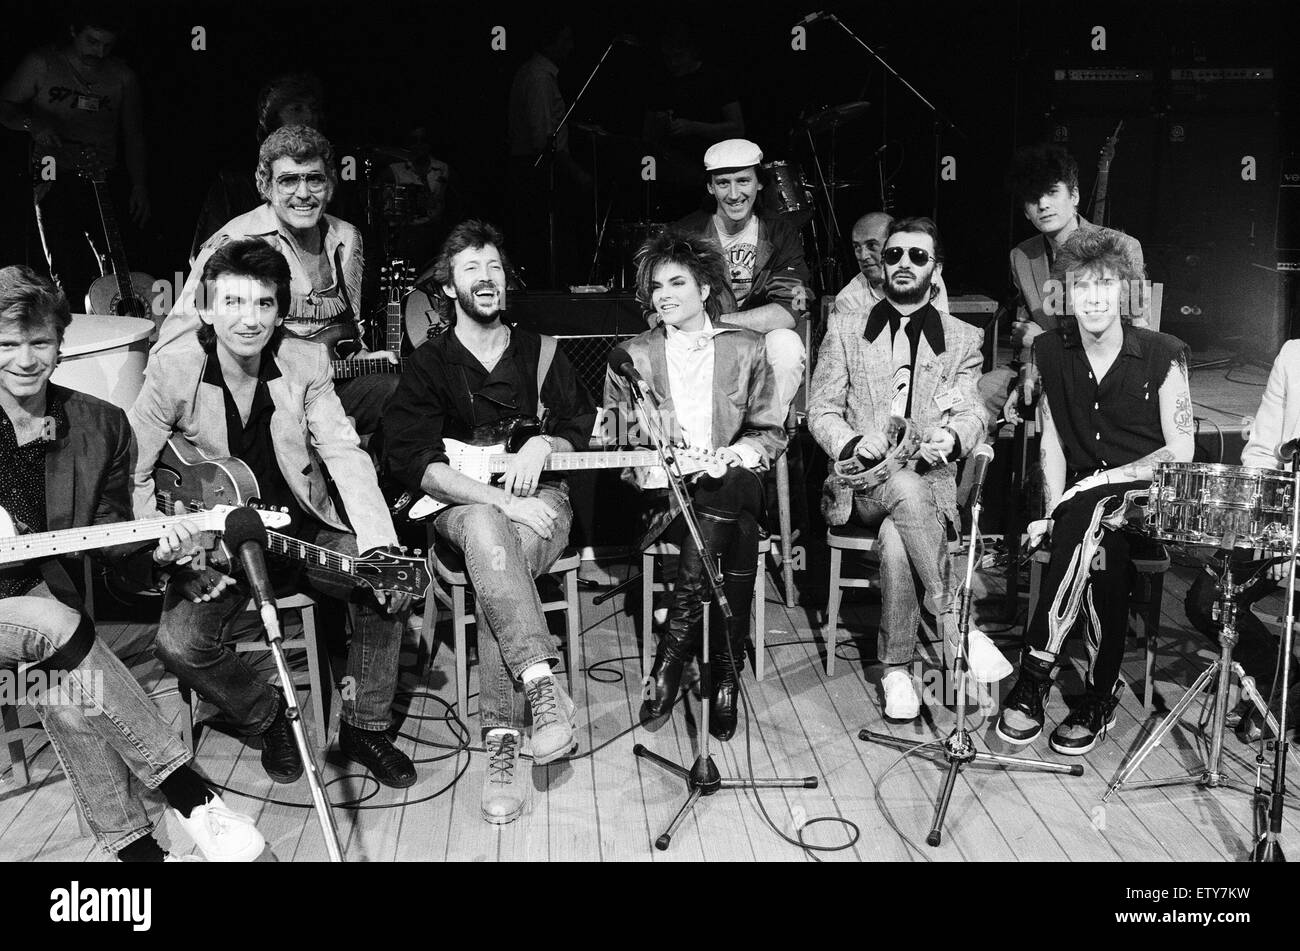 Carl Perkins assembled himself a super backing group at Channel 4's Limehouse Studios for a television programme 'Blue Suede Shoes'. Left to right:  Dave Edmunds, George Harrison, Carl Perkins, Eric Clapton, Rosanne Cash, Ringo Starr, Slim Jim Phantom. 21 Stock Photo